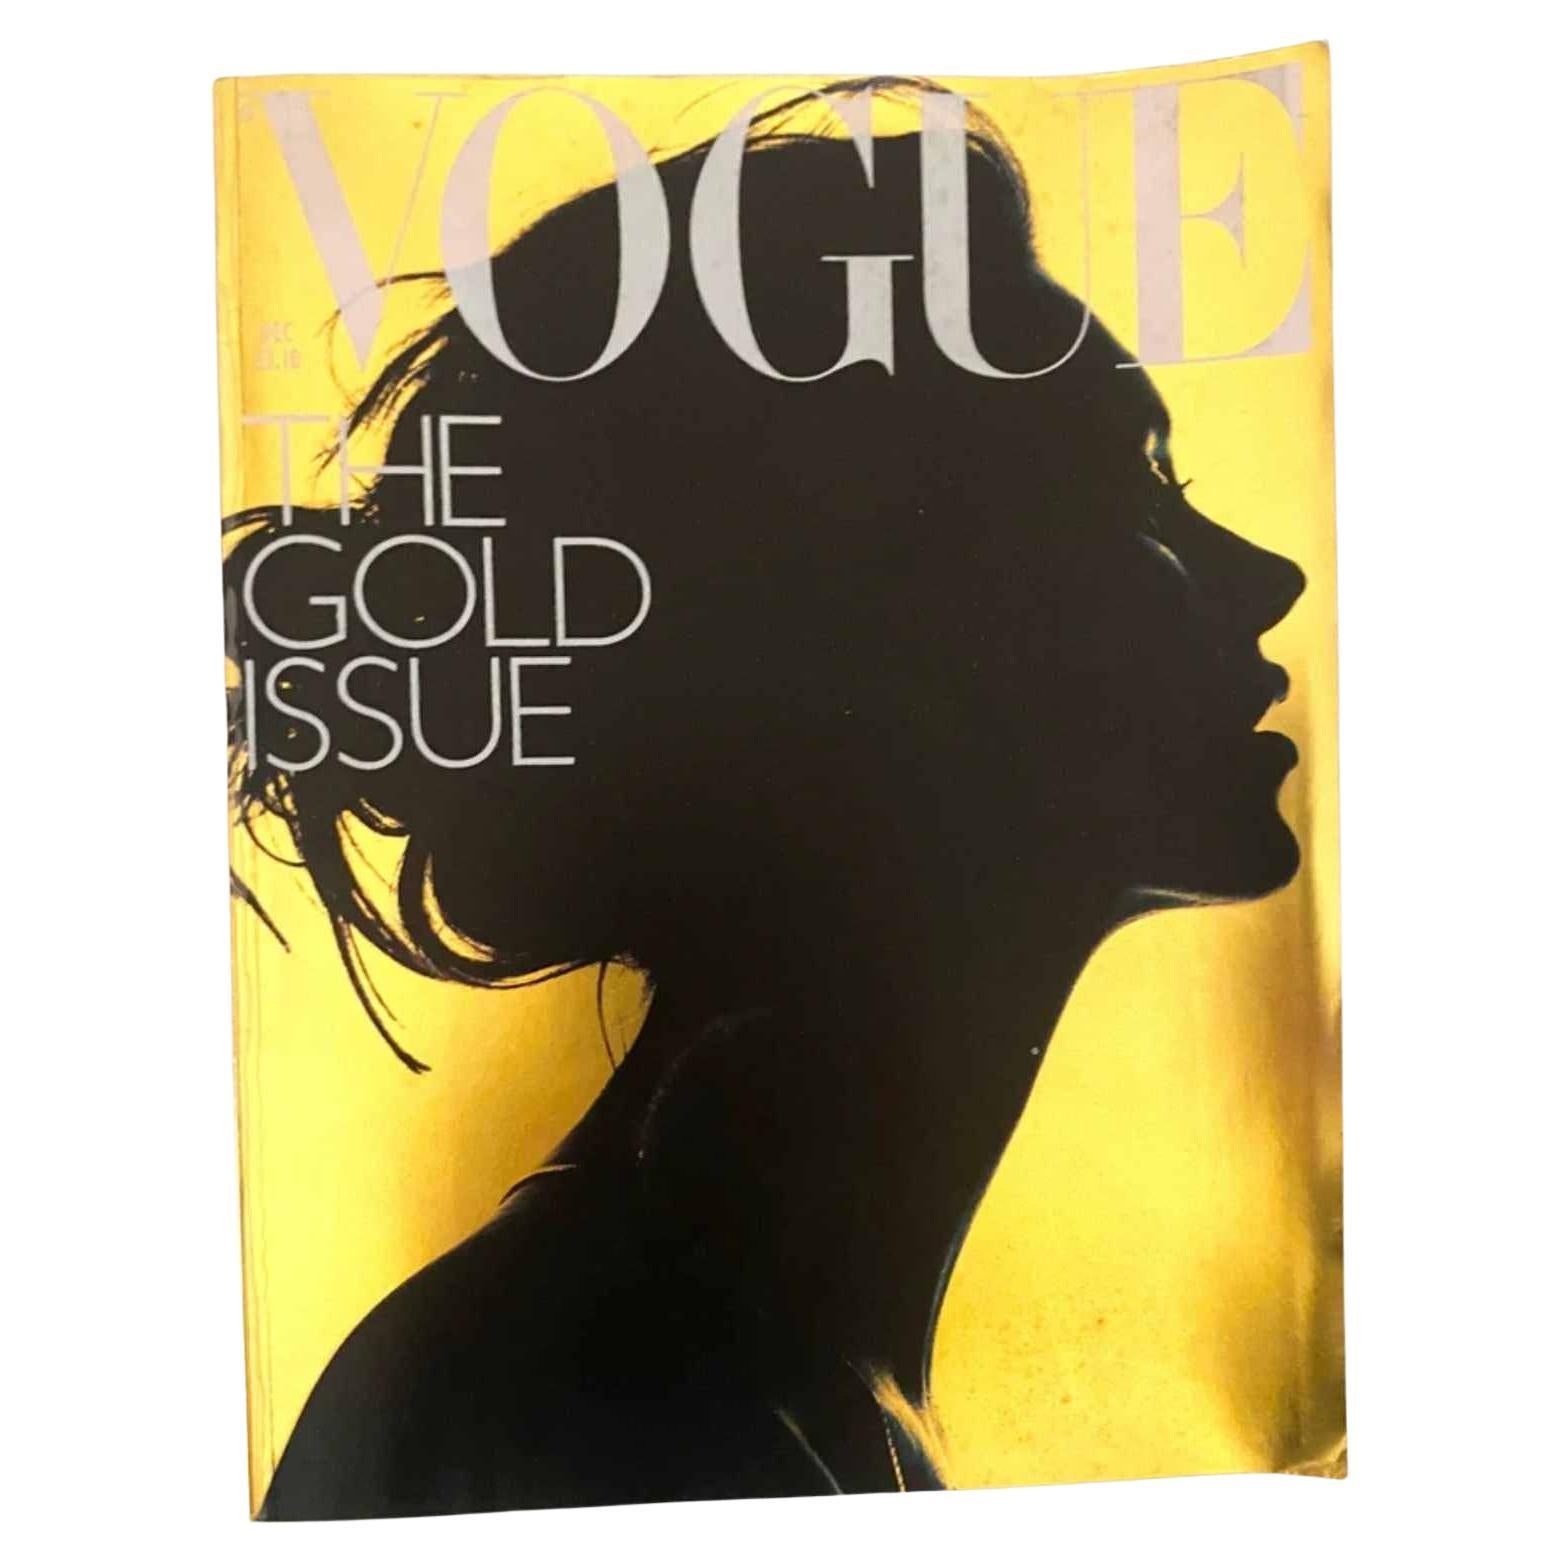 2000 Vogue - The Golden Issue - Cover by Nick Knight For Sale